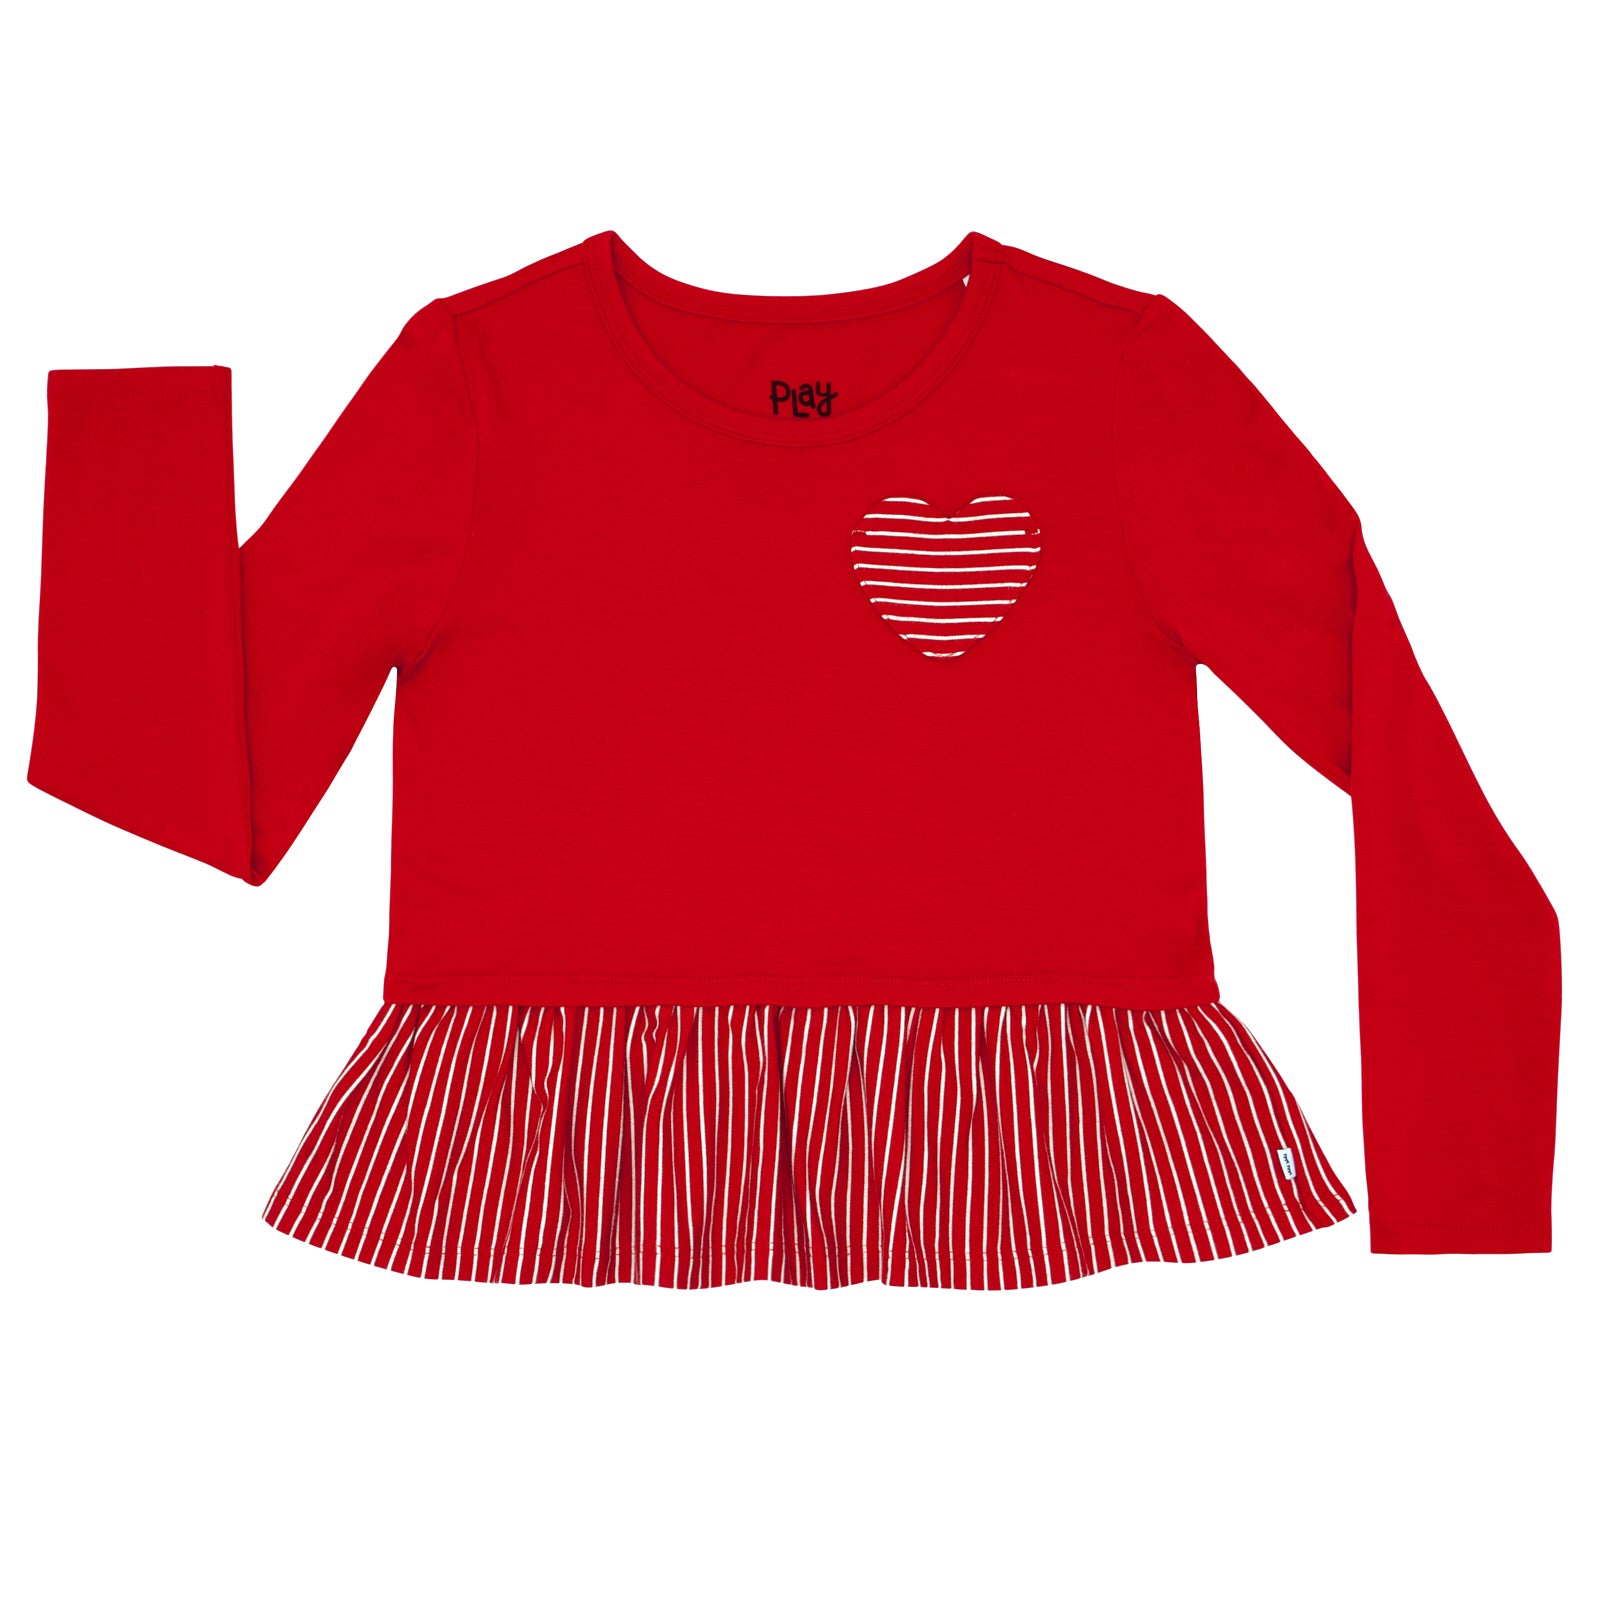 Flat lay image of a Candy Red peplum tee